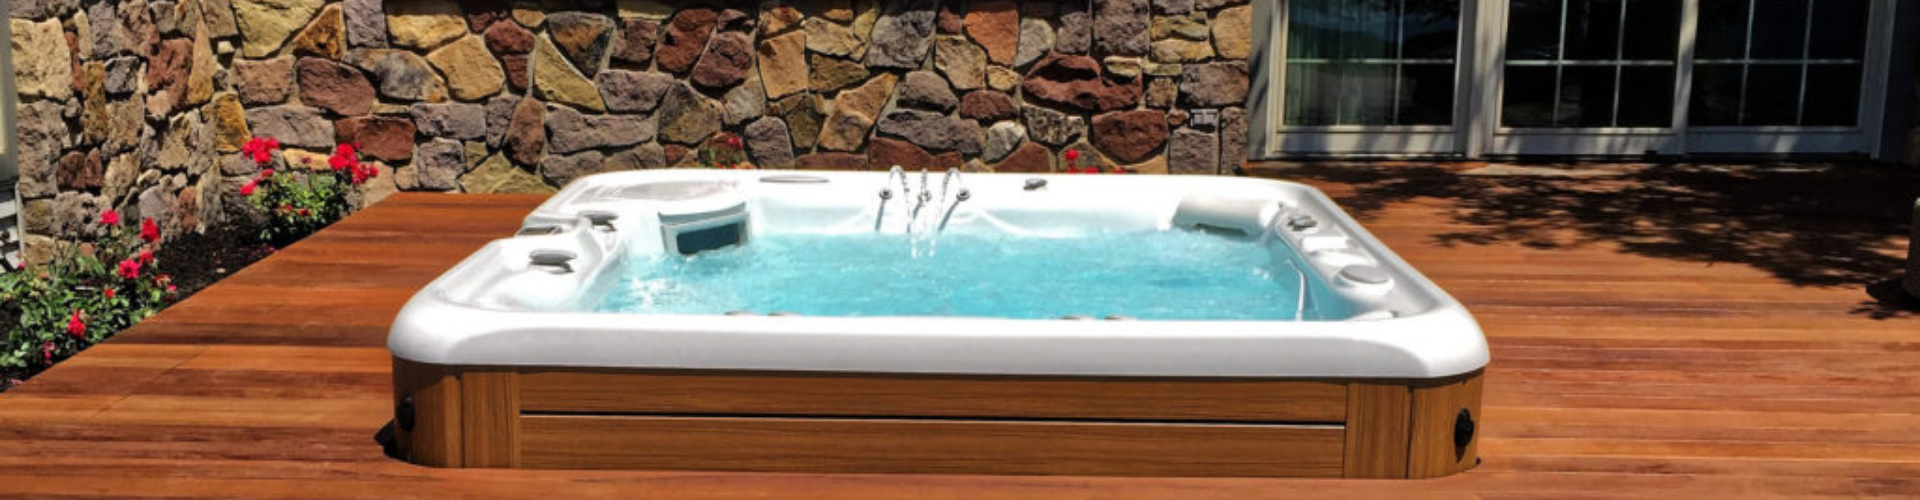 Does a Hot Tub Increase Home Value?